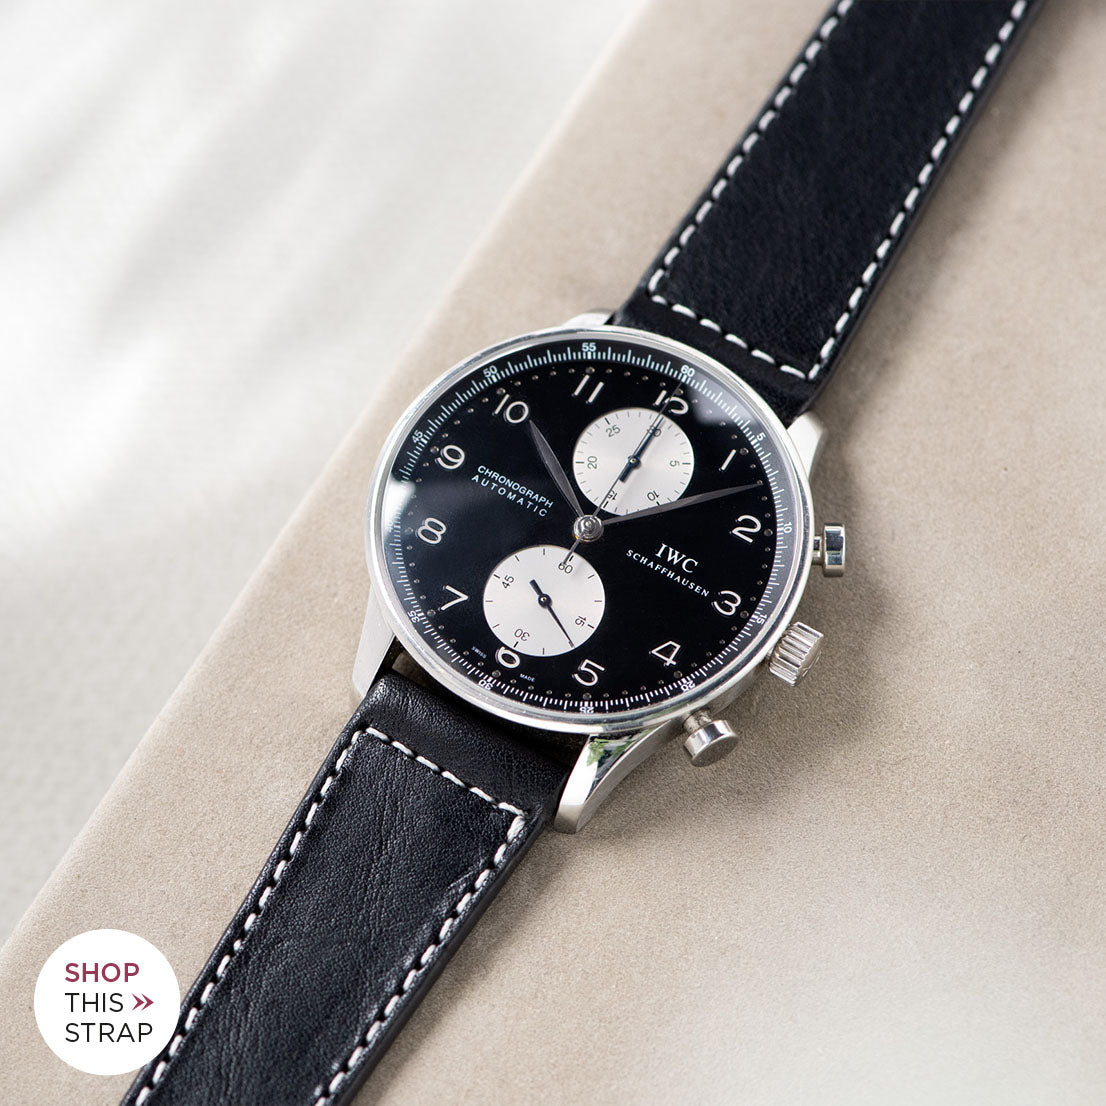 Bulang and Sons_Strap Guide_IWC-Portugieser_Black Boxed Stitch Leather Watch Strap